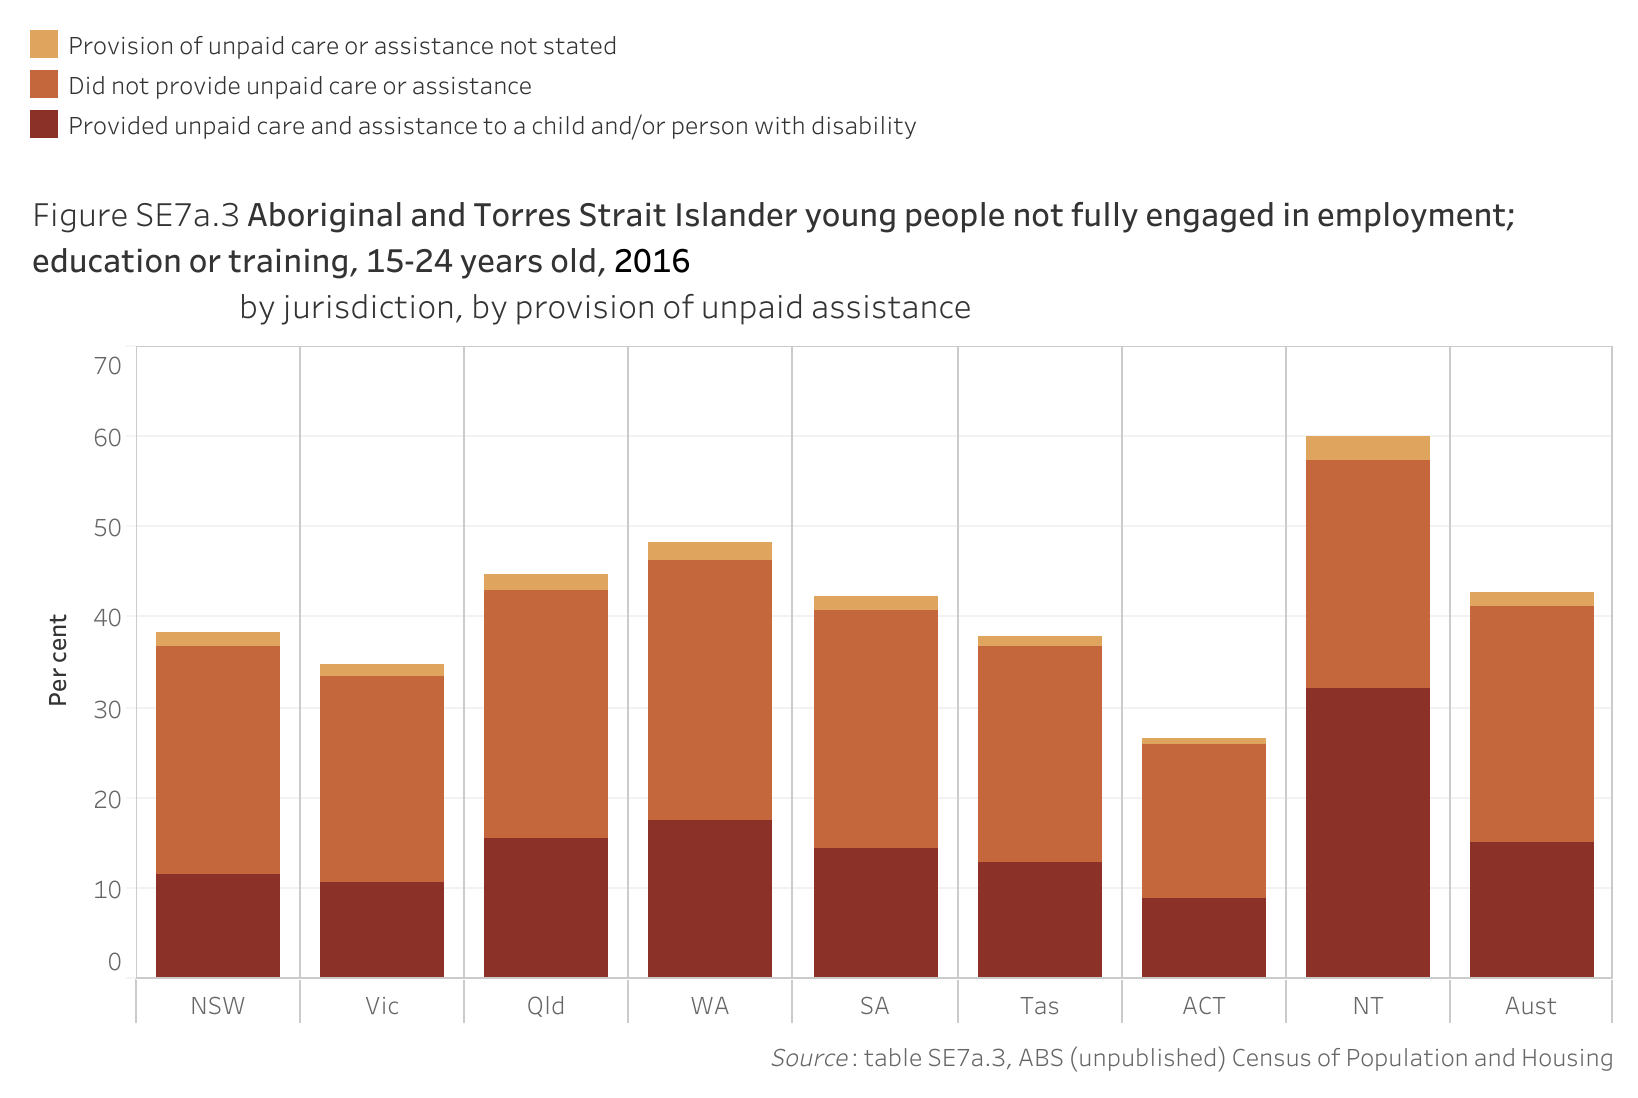 Figure SE7a.3. Bar chart showing the proportion of Aboriginal and Torres Strait Islander young people aged 15-24 years old not fully engaged in employment; education or training in 2016, by jurisdiction and by provision of unpaid assistance. Data table of figure SE7a.3 is below.